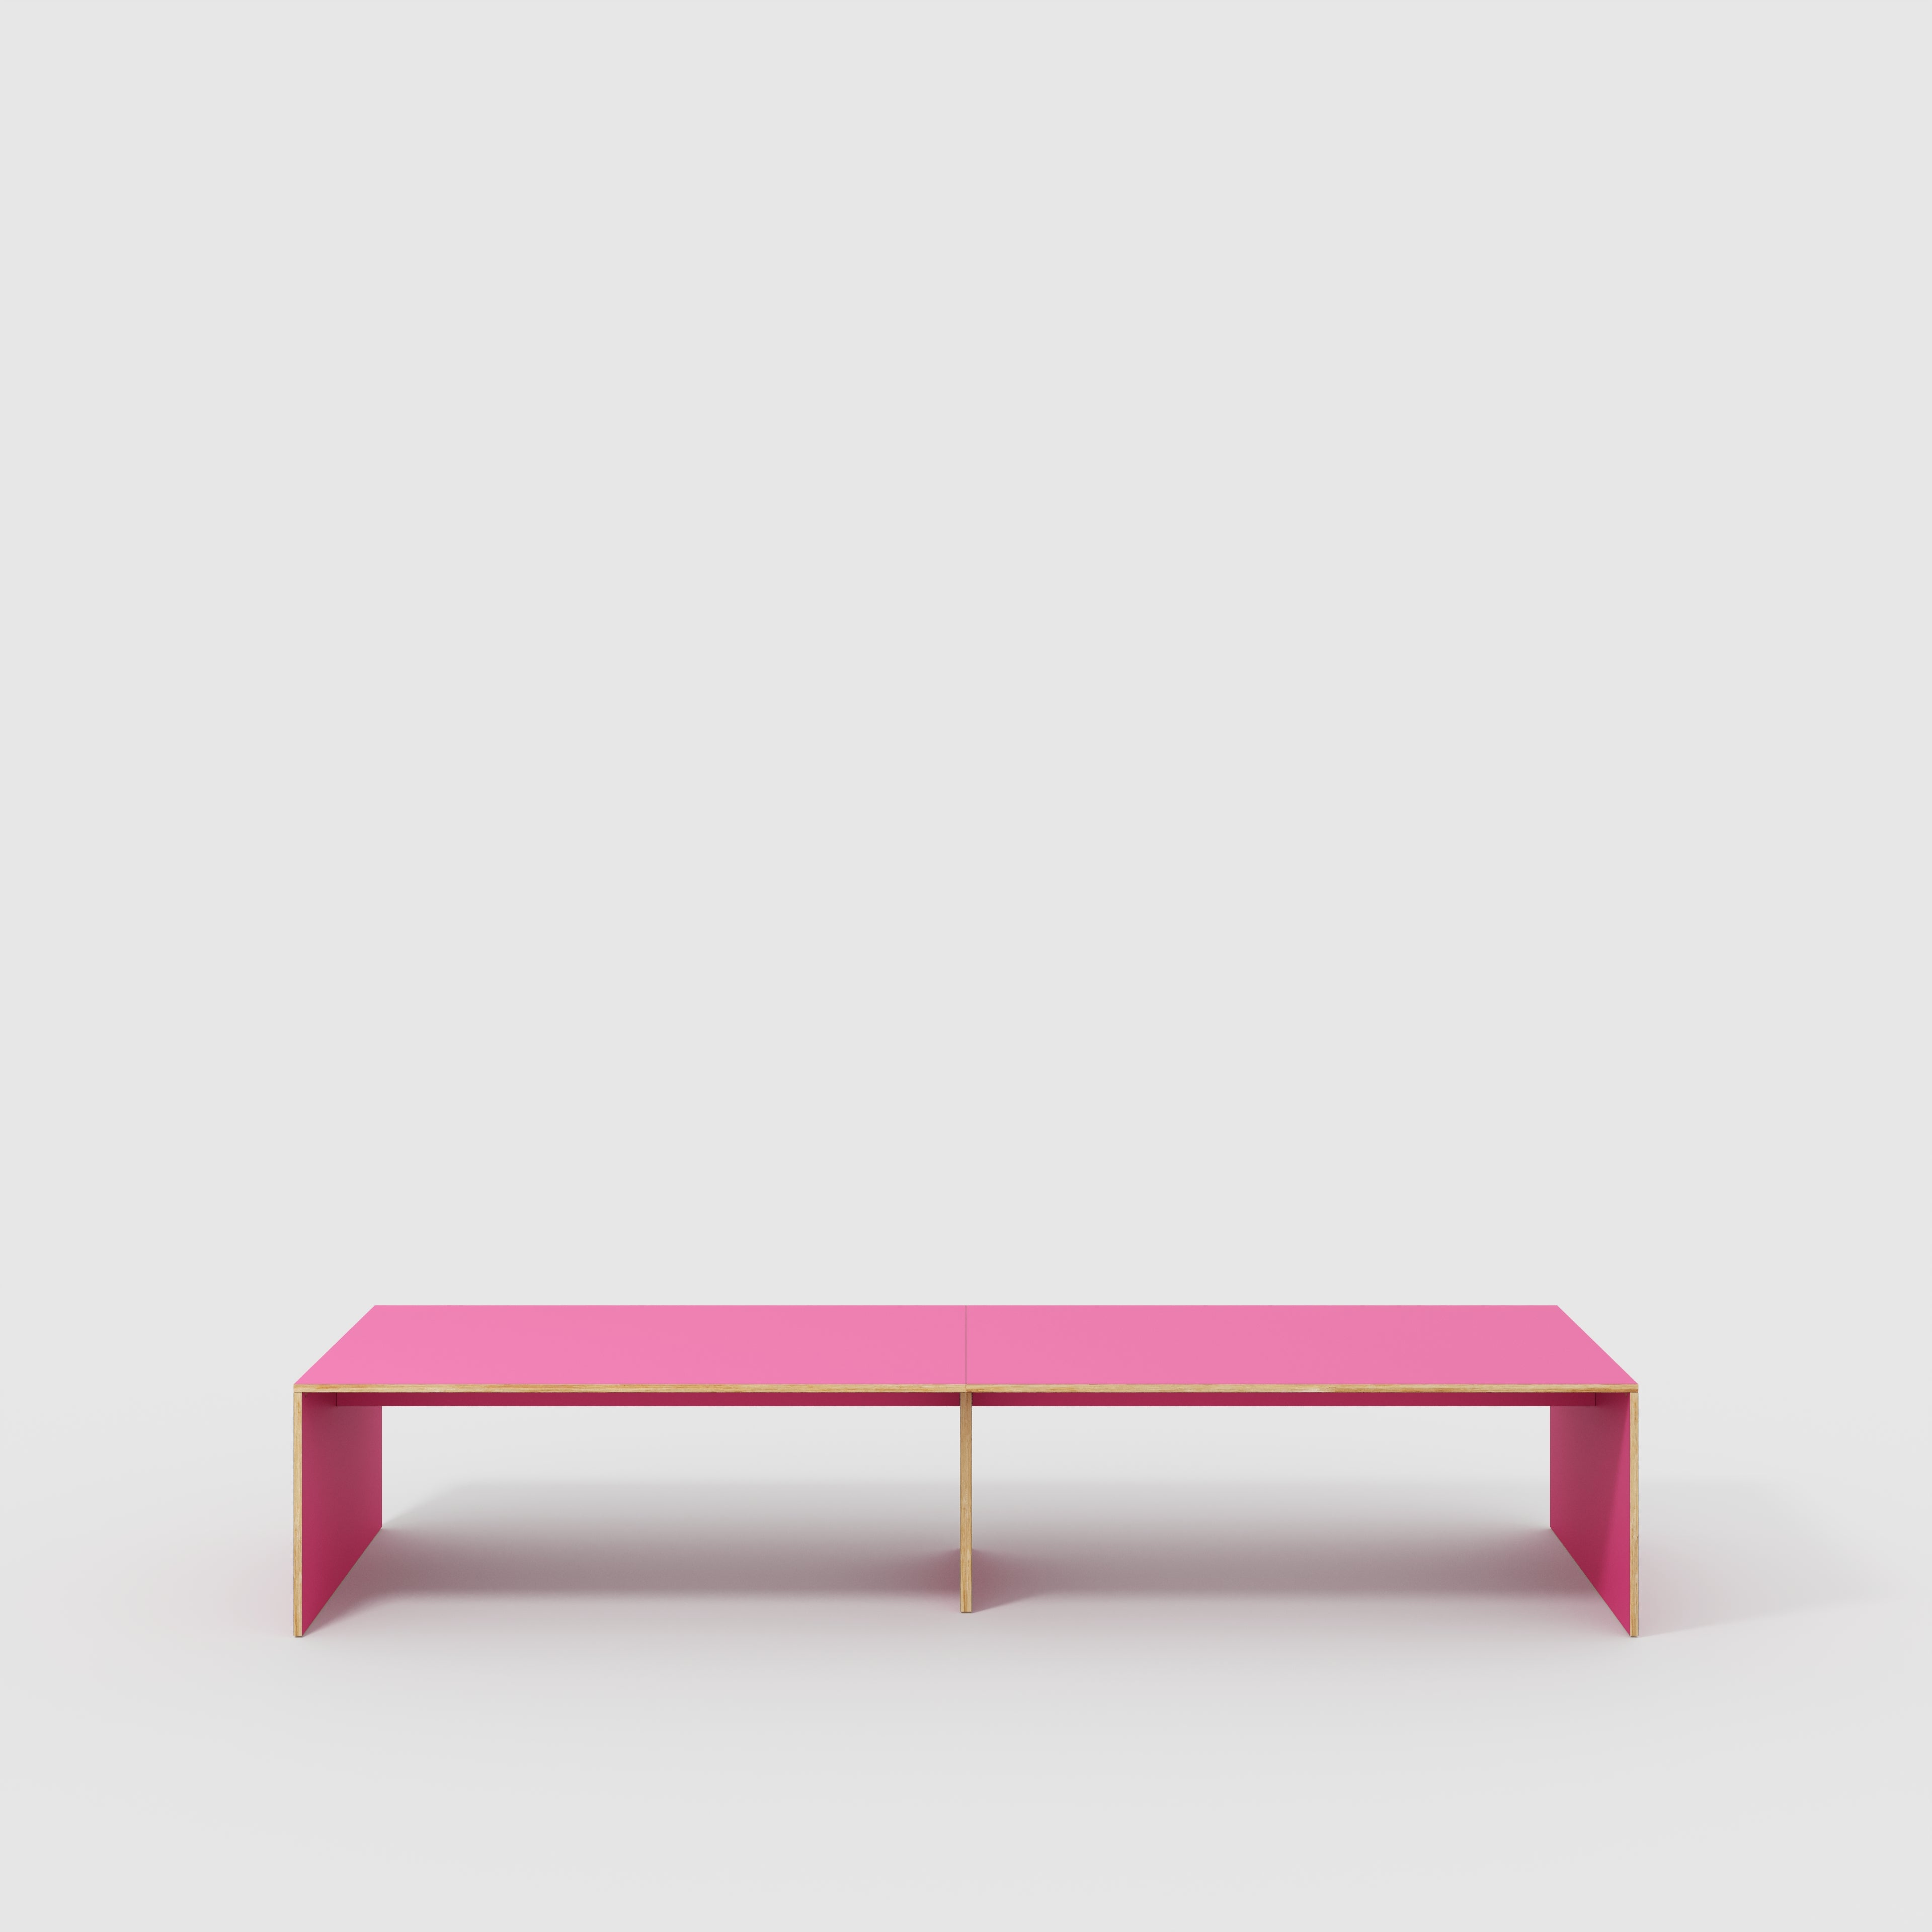 Table with Solid Sides - Formica Juicy Pink - 4000(w) x 1000(d) x 750(h)